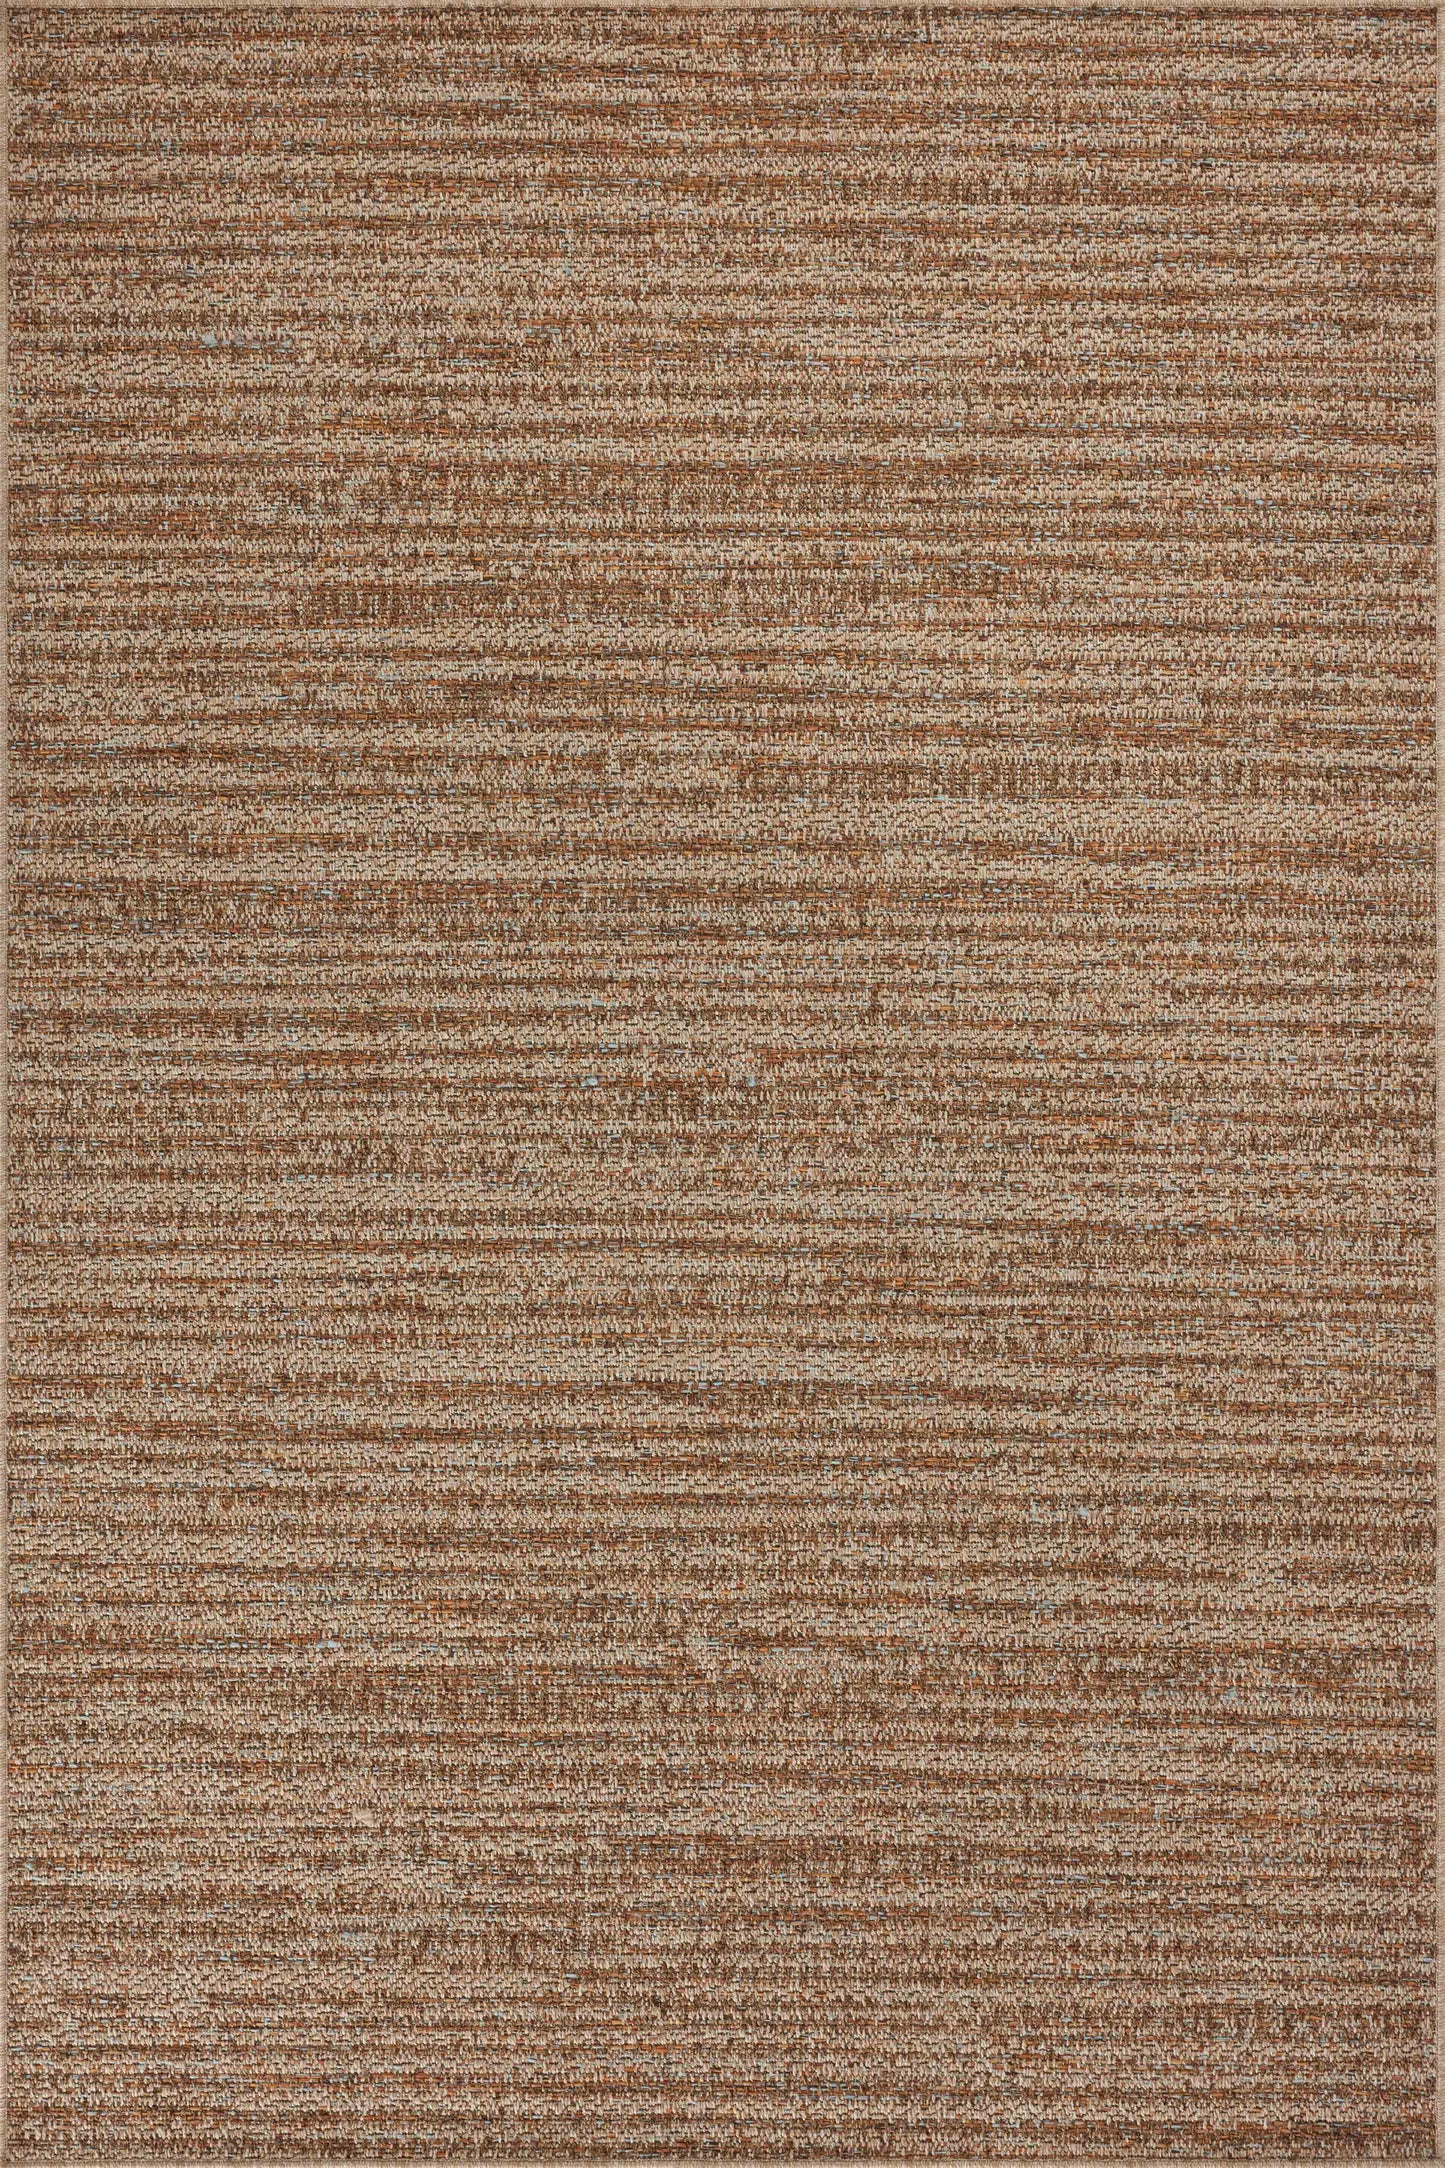 A picture of Loloi's Merrick rug, in style MER-06, color Oatmeal / Multi